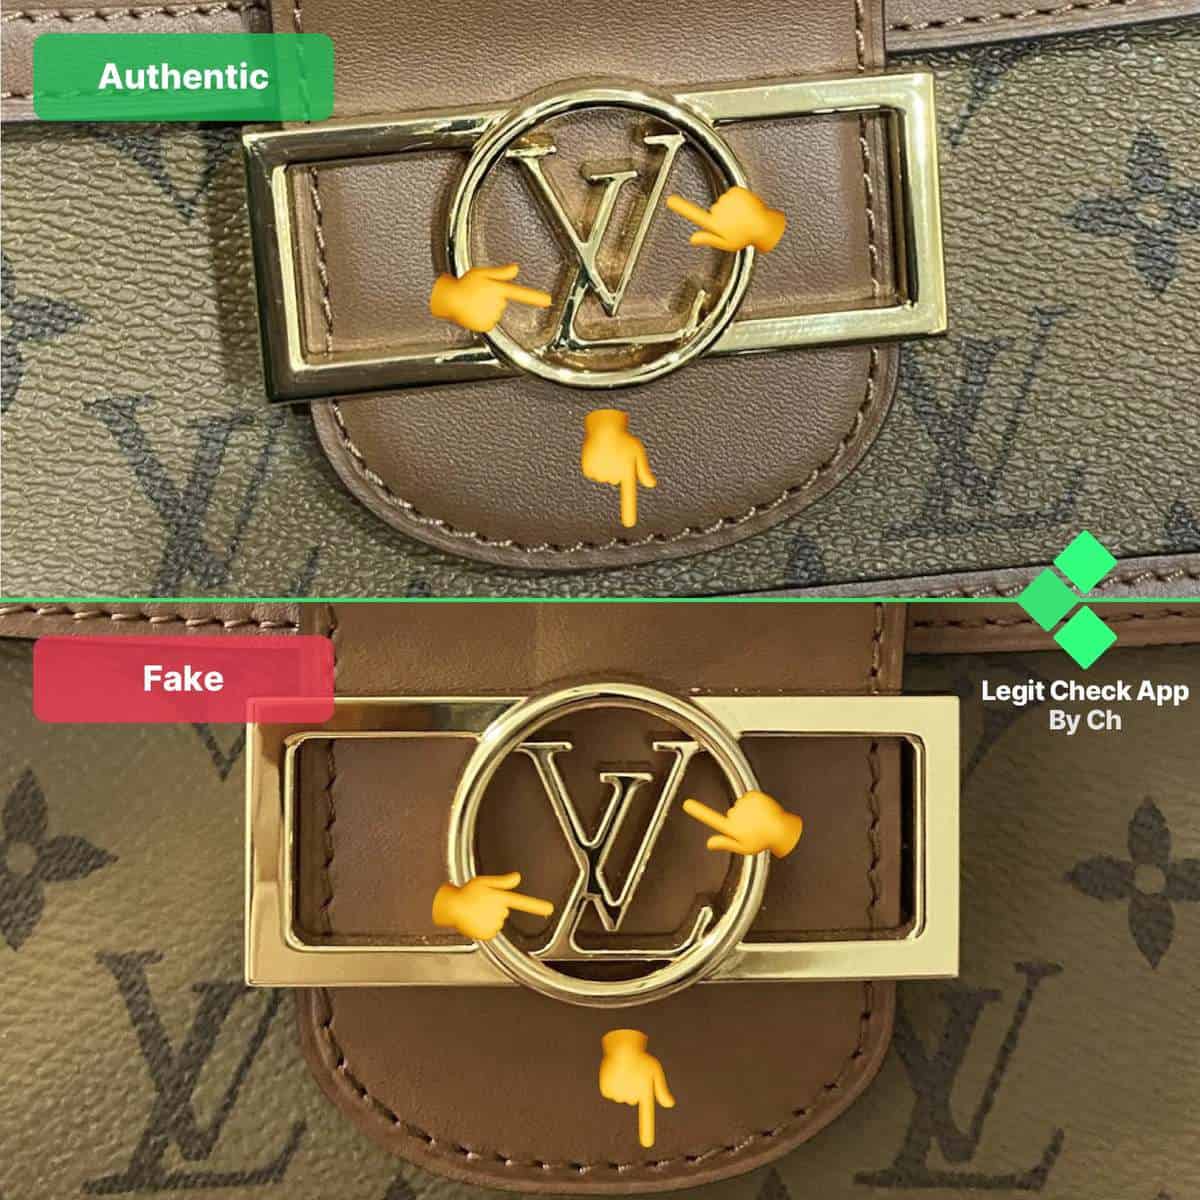 LOUIS VUITTON DAUPHINE MM  FIRST IMPRESSIONS - CONS - MOD SHOTS 